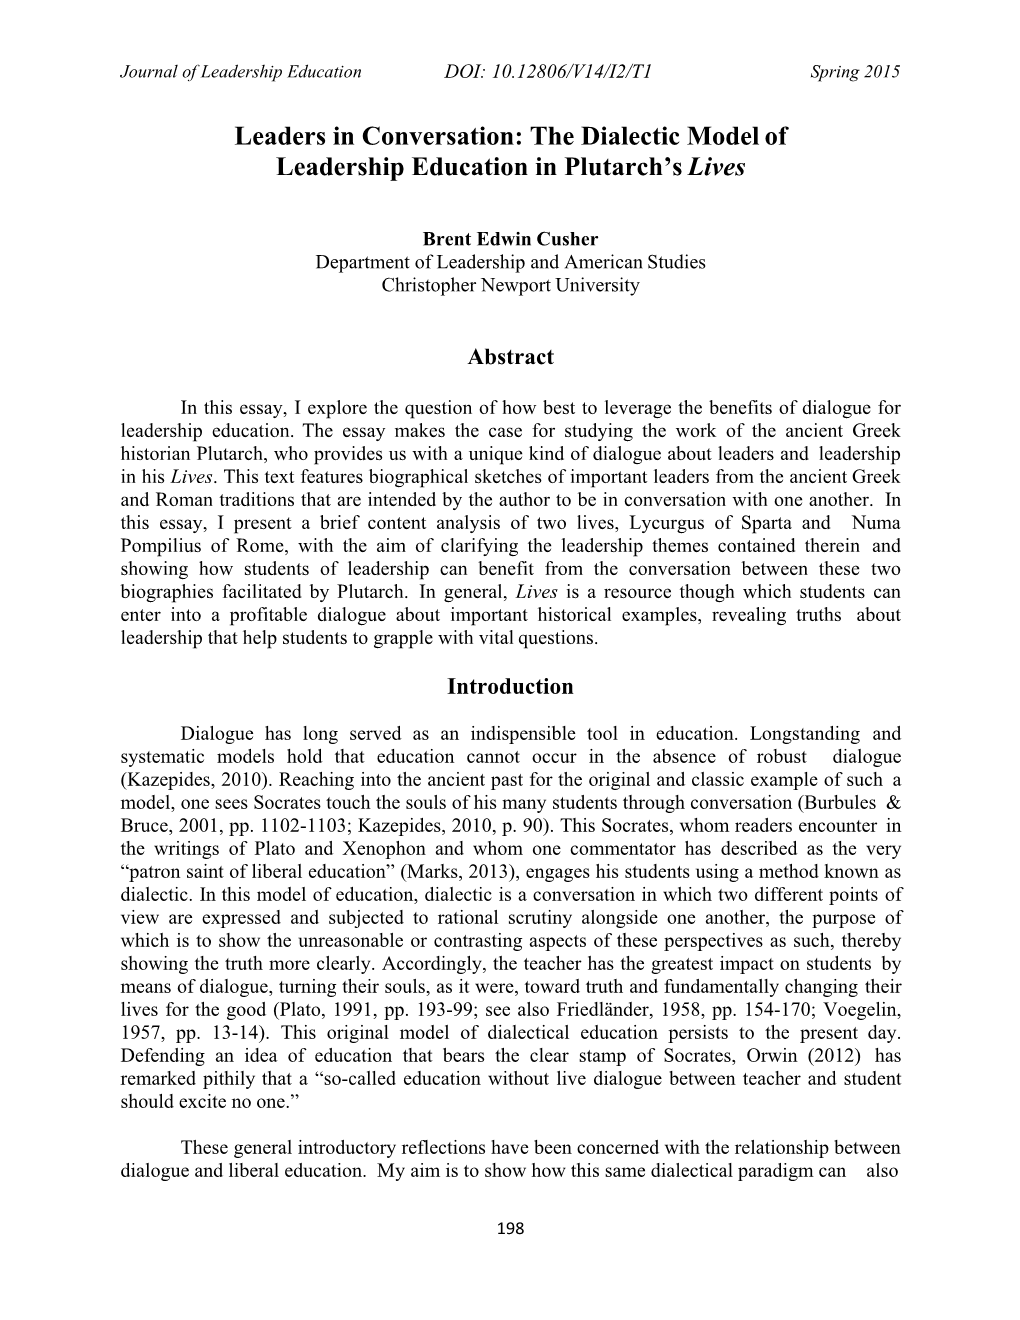 The Dialectic Model of Leadership Education in Plutarch's Lives